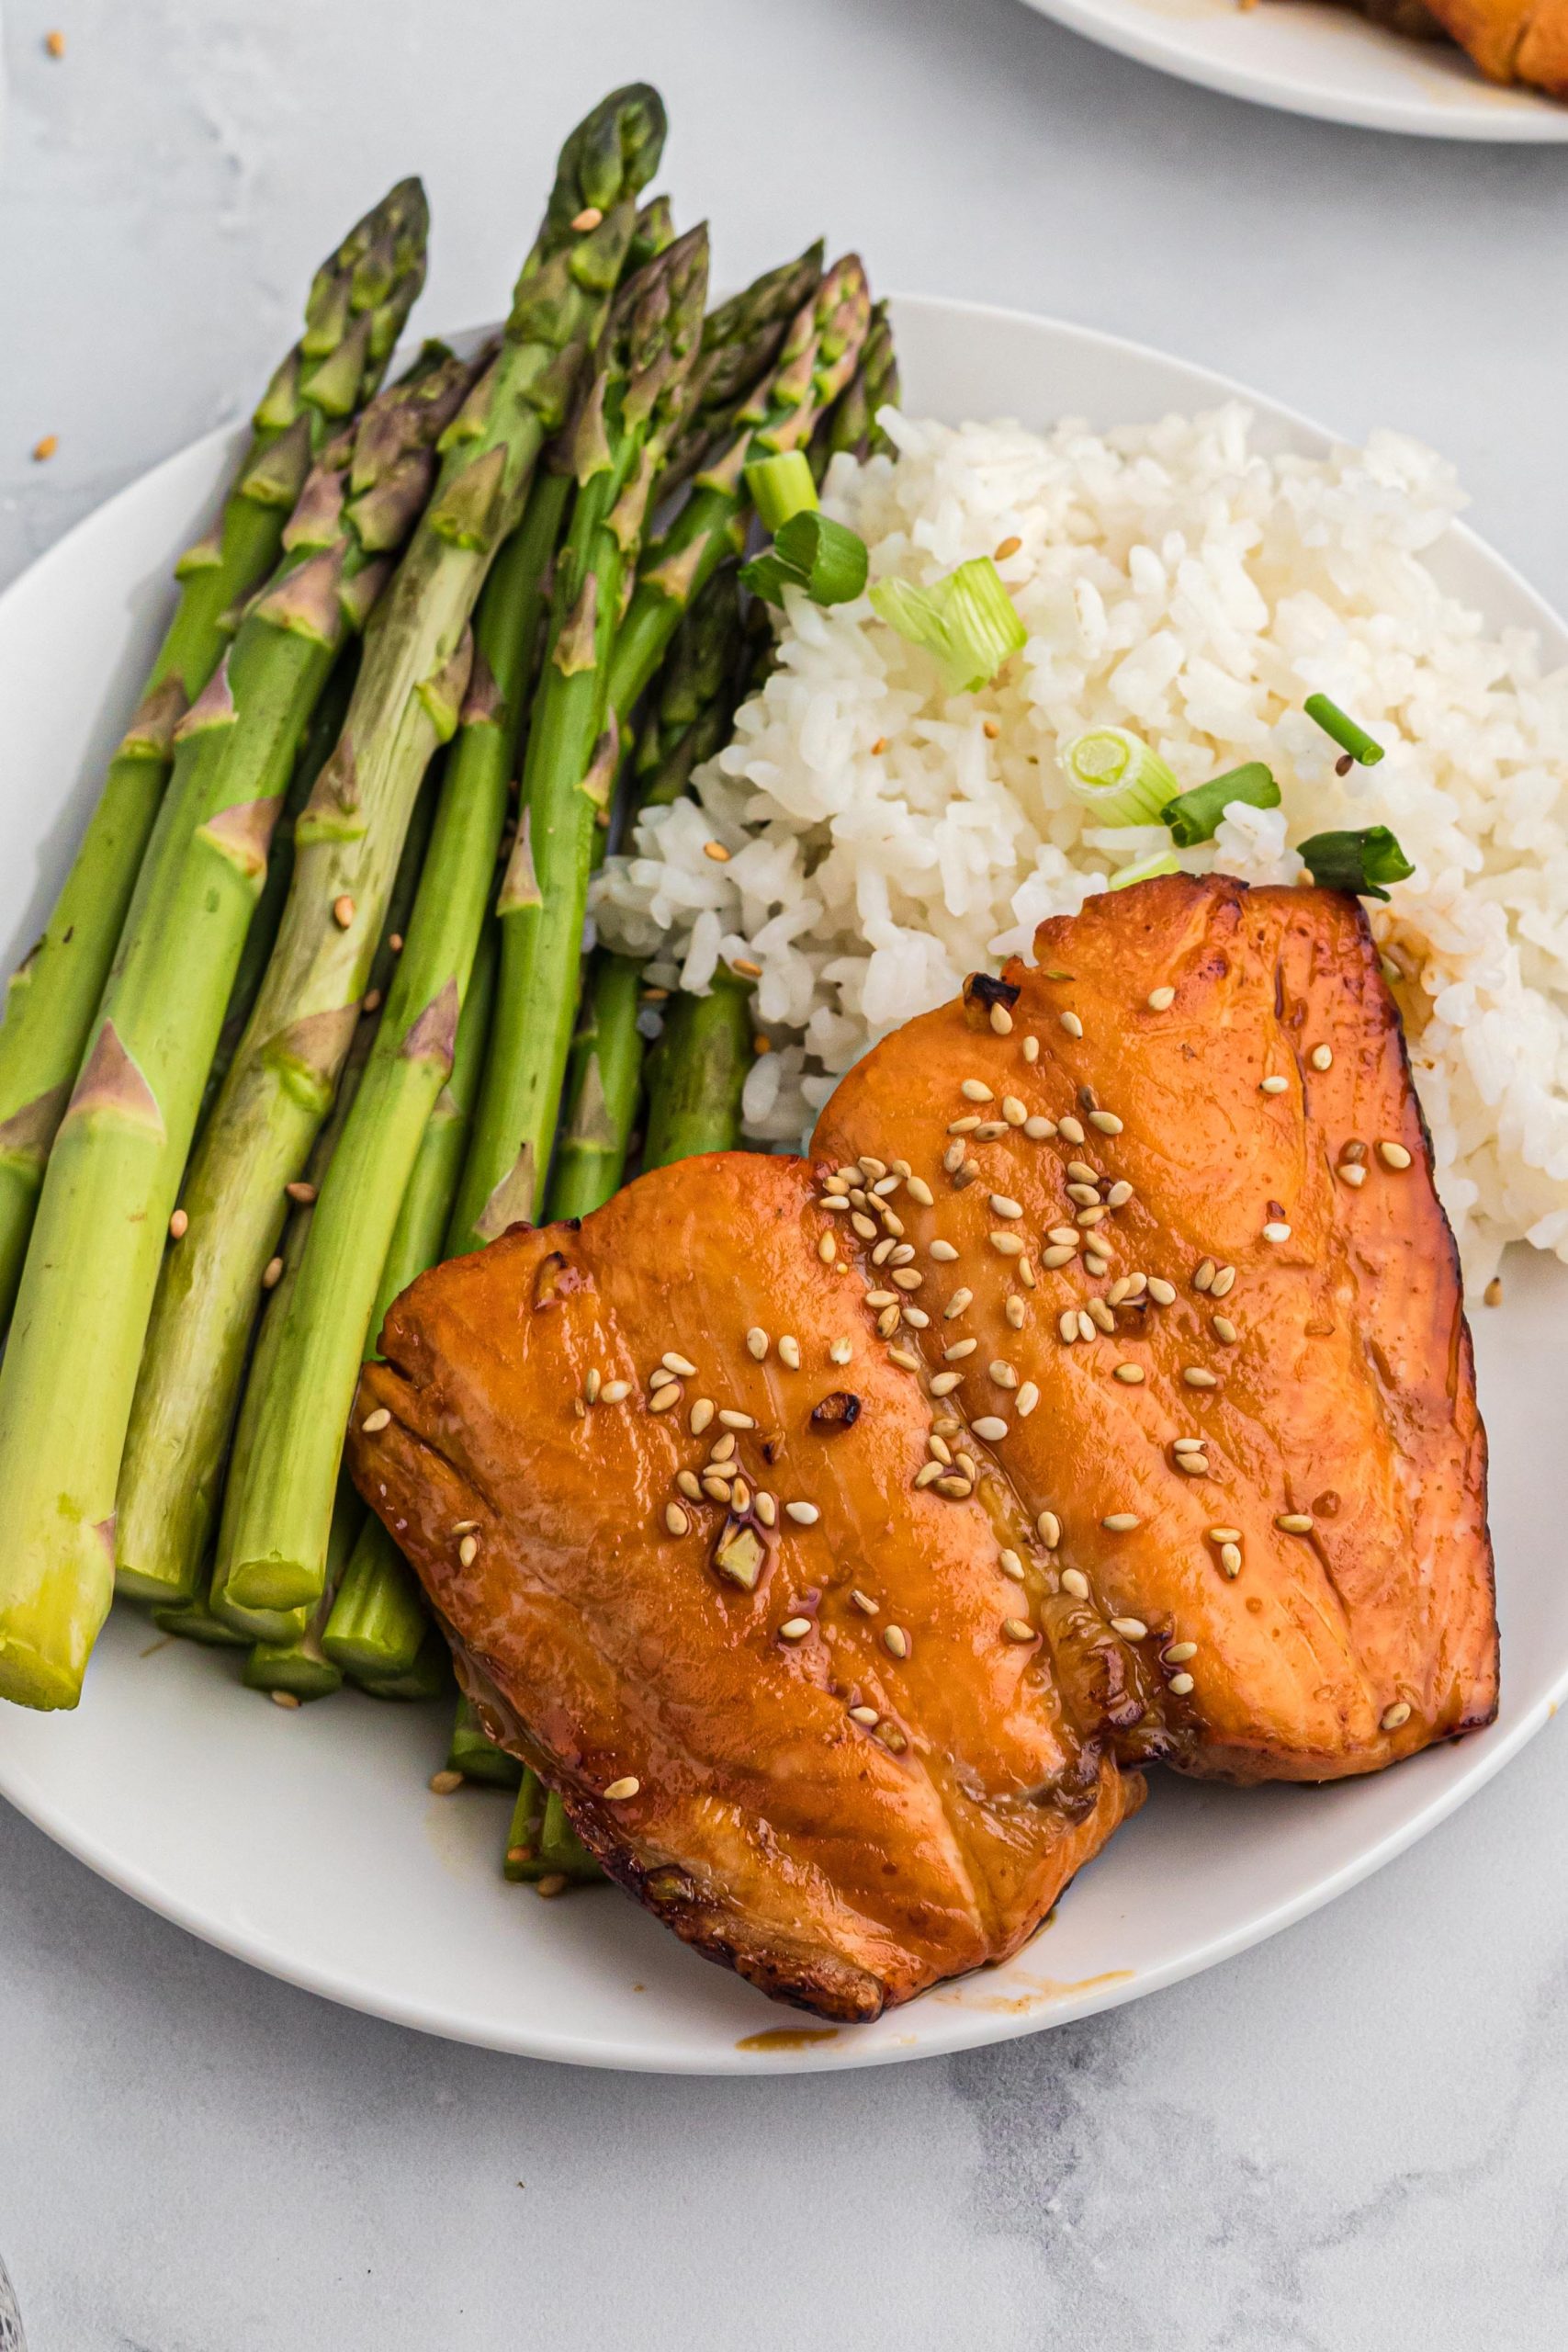 Asparagus, rice, and salmon on a small white plate.